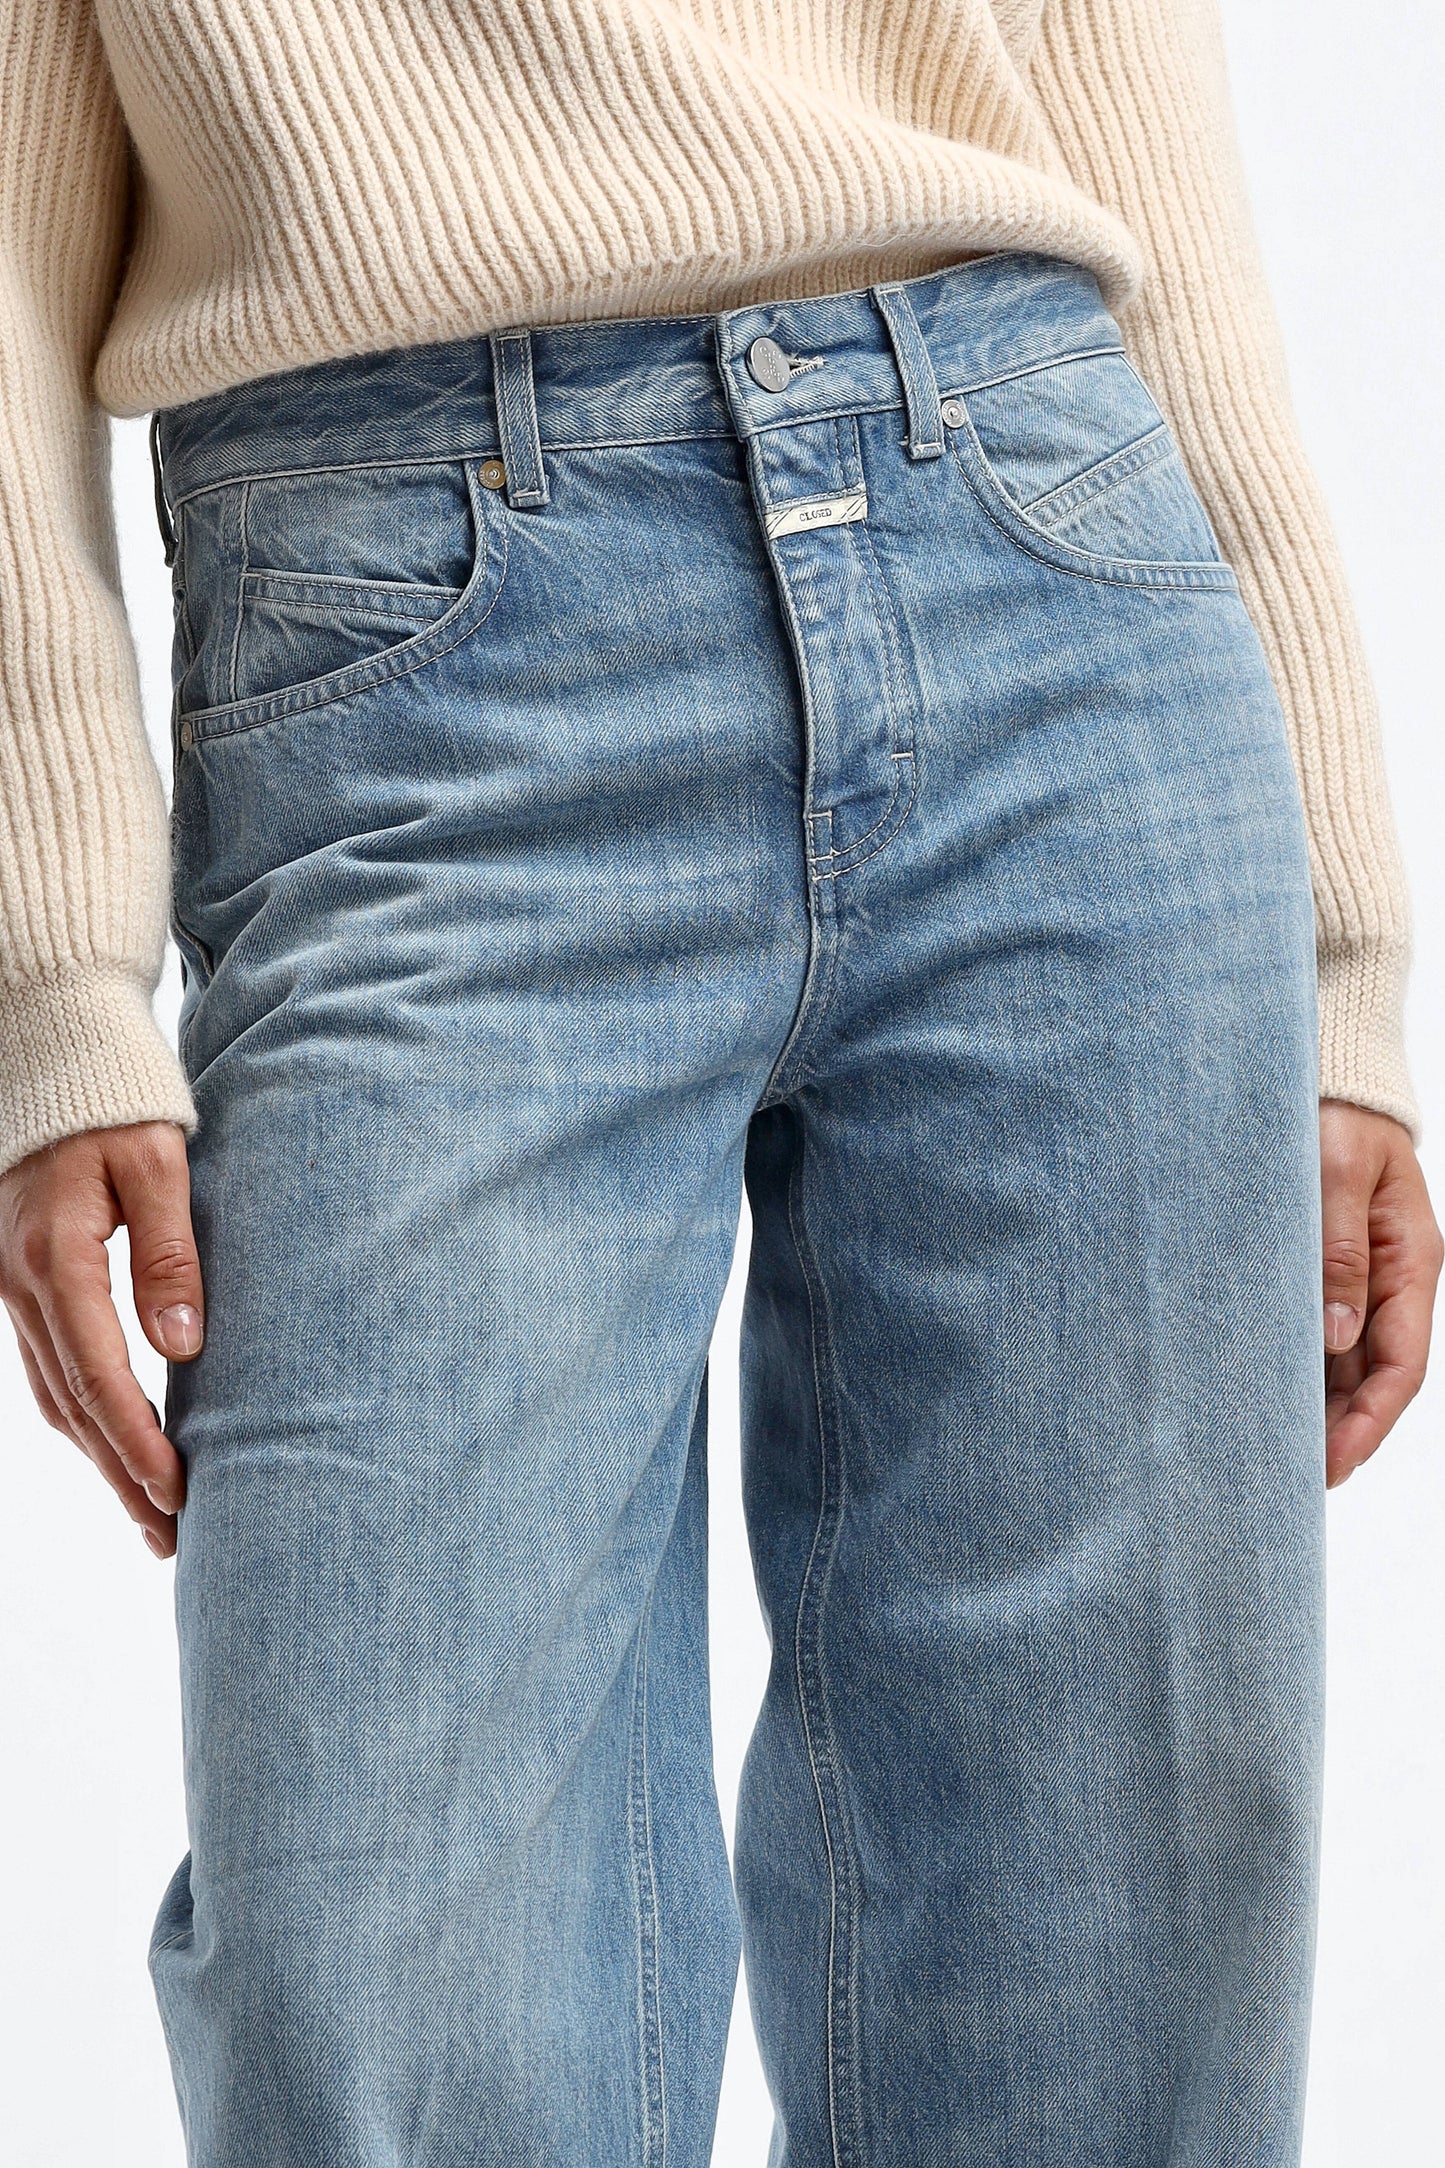 Jeans Nikka Cropped in Mid BlueClosed - Anita Hass